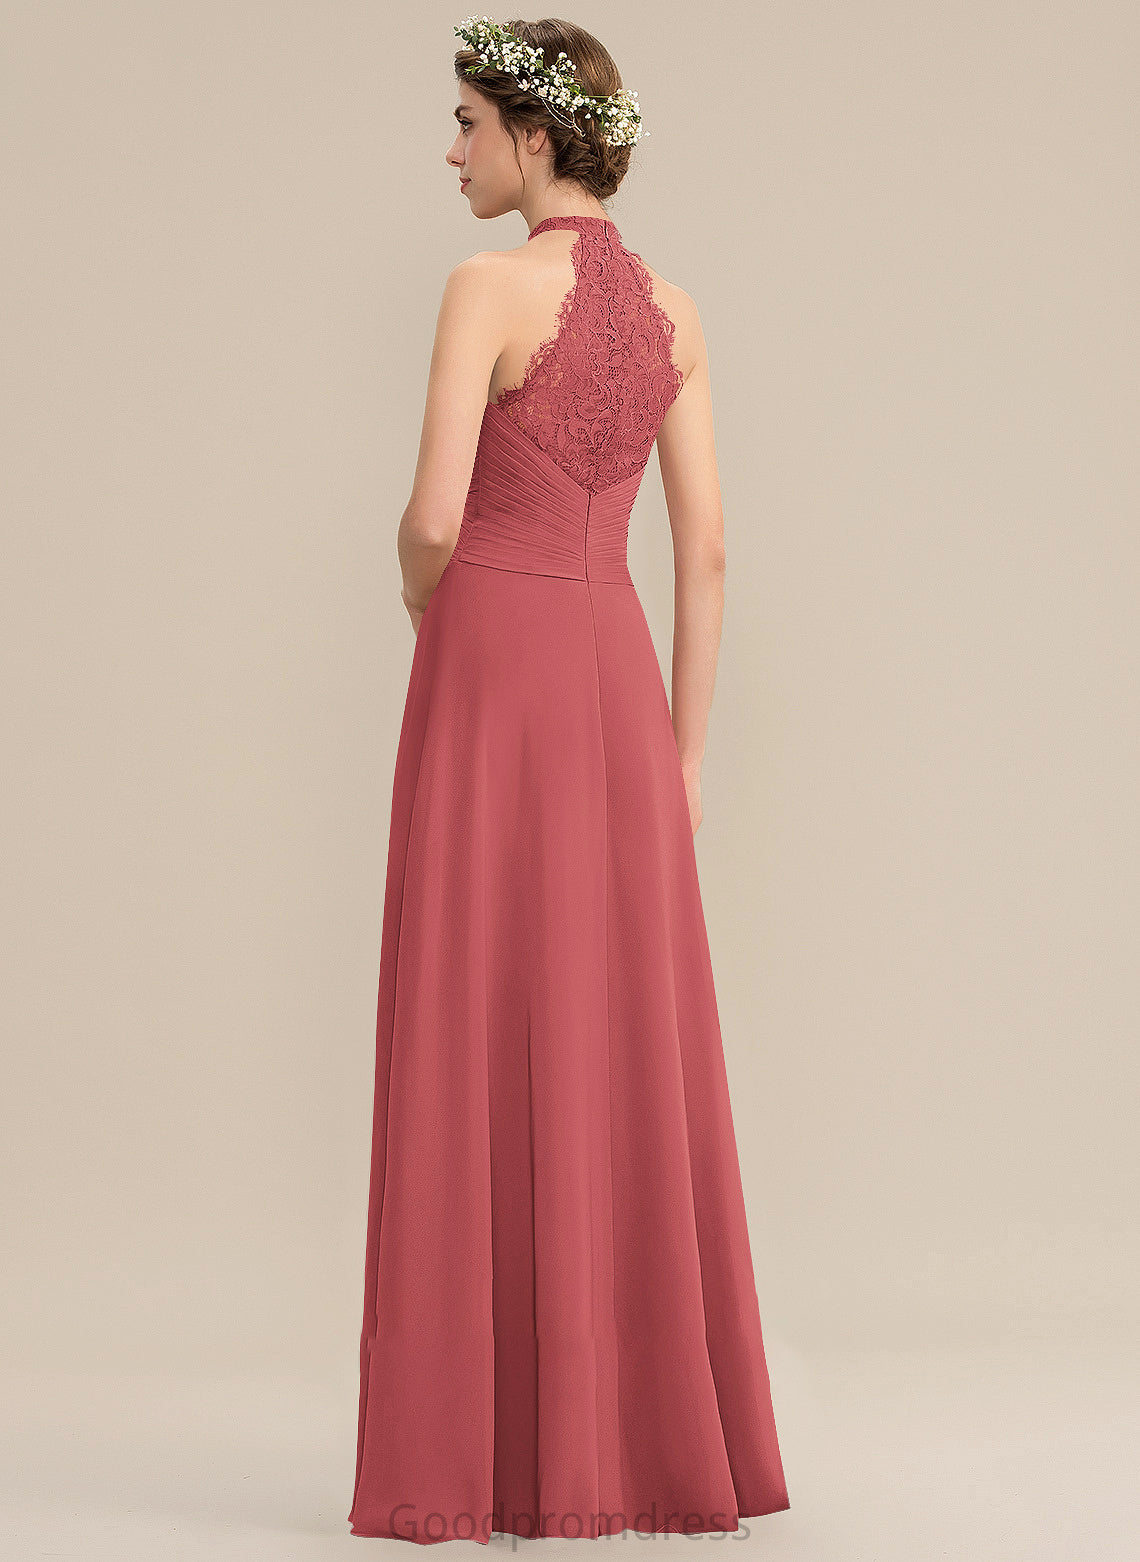 Lace Ruffle High Prom Dresses Front With Split Neck Annika A-Line Floor-Length Chiffon